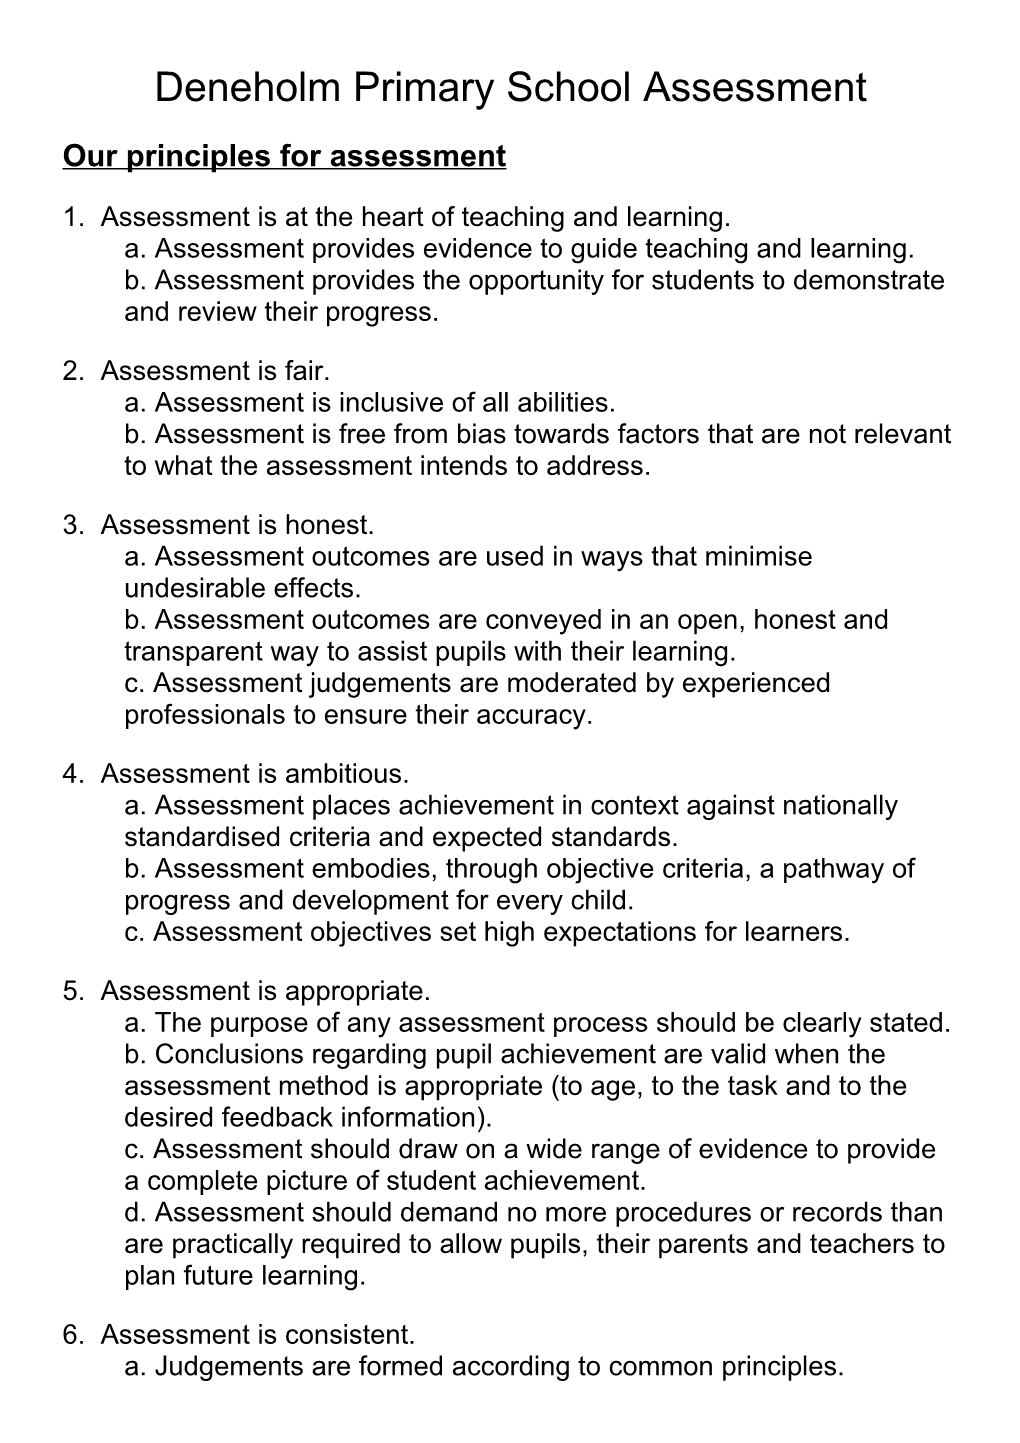 Our Principles for Assessment